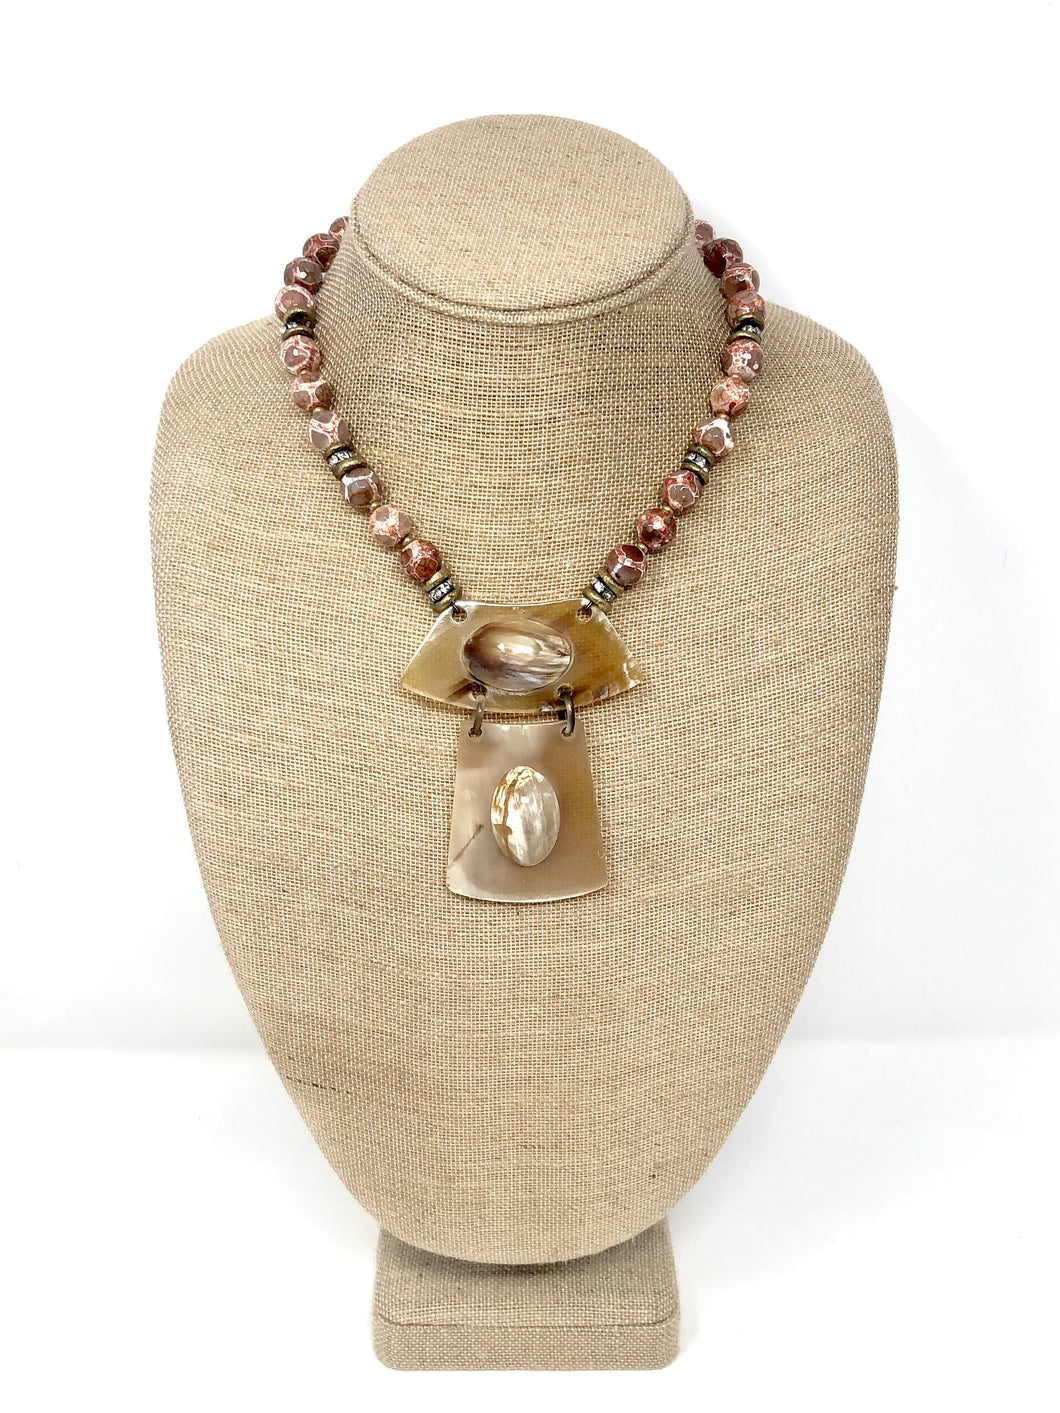 Agate Necklace with Horn Pendant